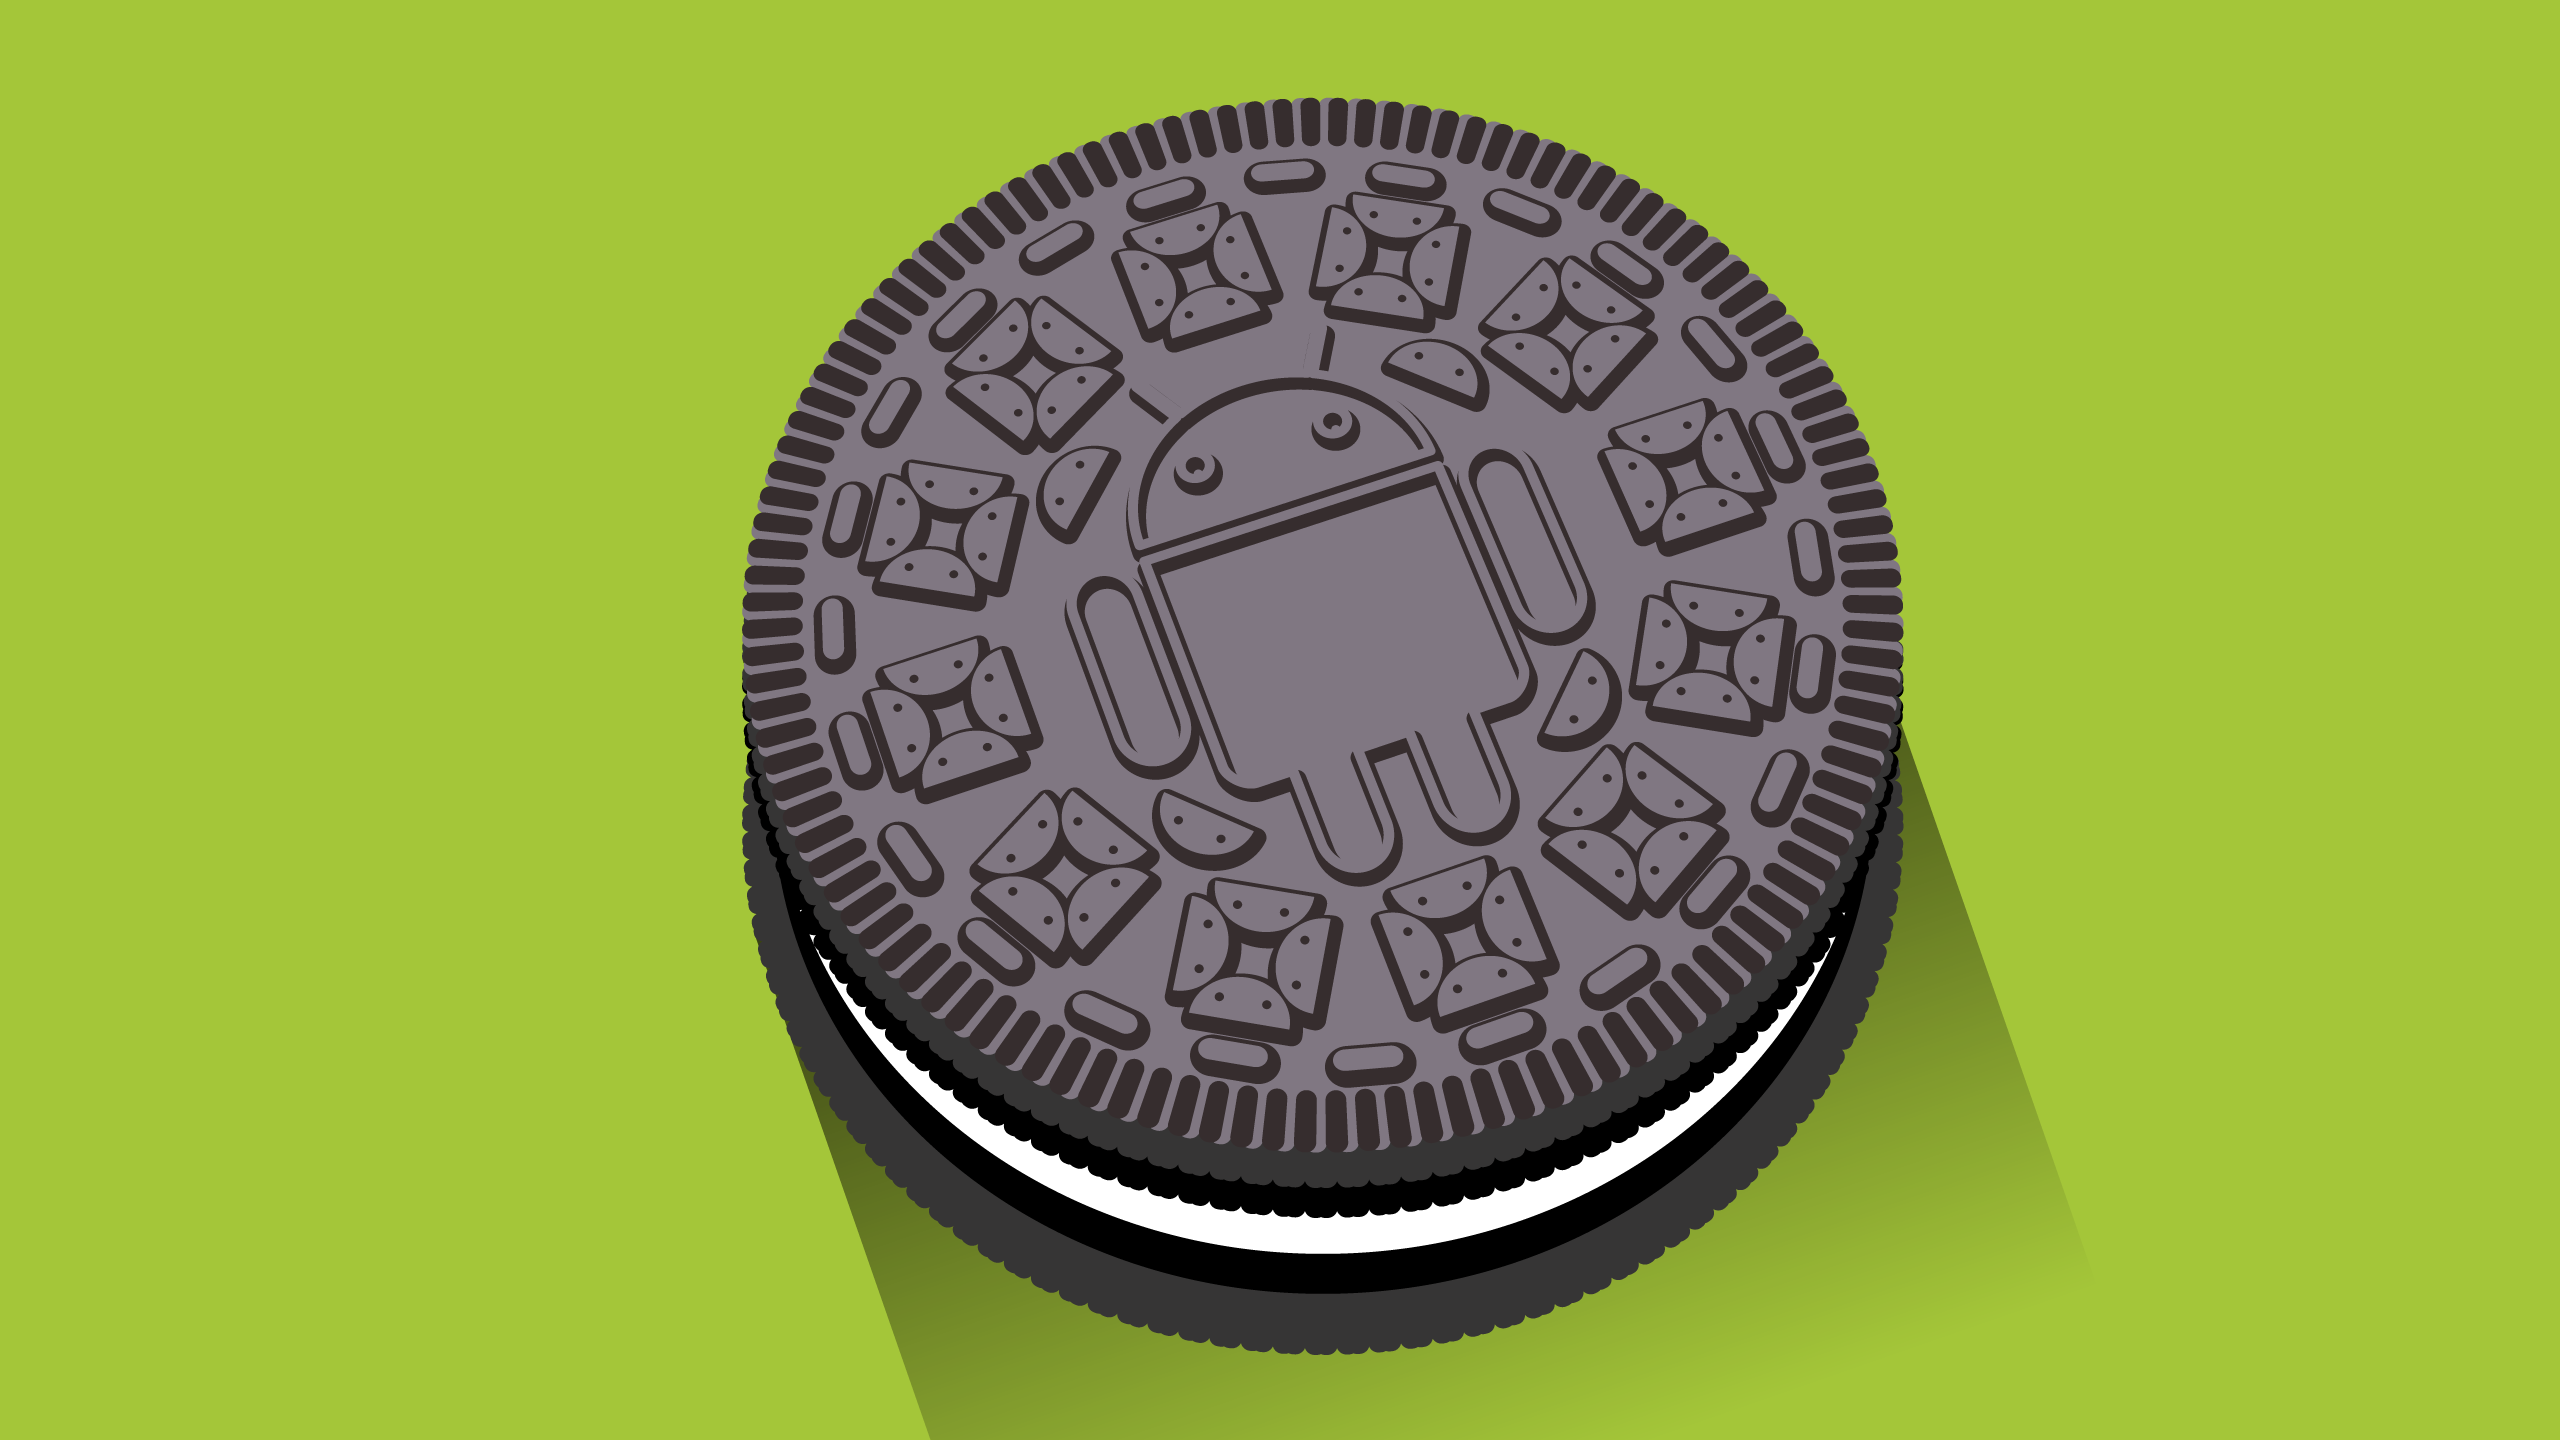 Not even 1% of Android devices run on Oreo